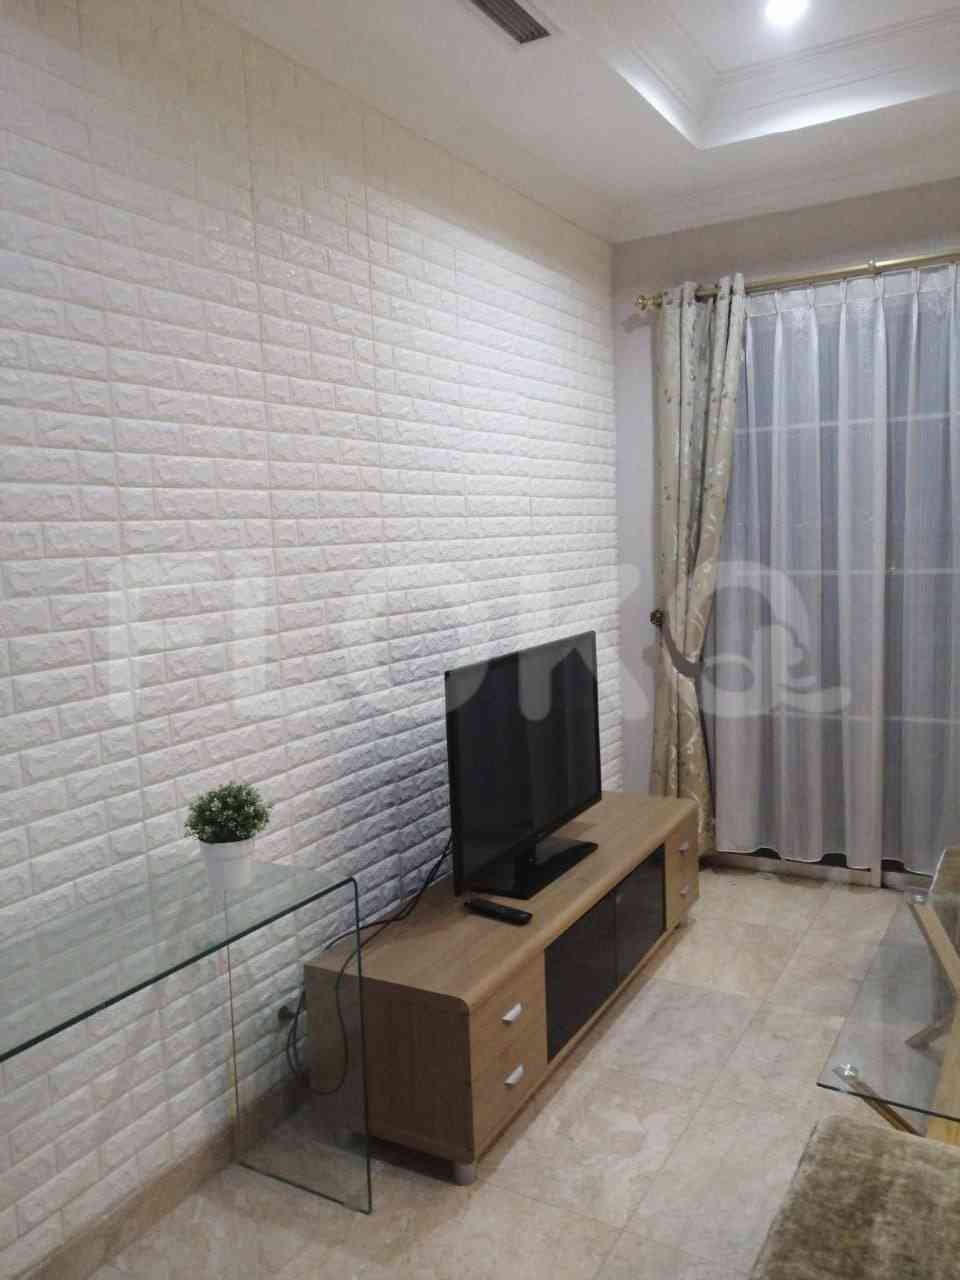 2 Bedroom on 9th Floor for Rent in Bellezza Apartment - fpe774 3